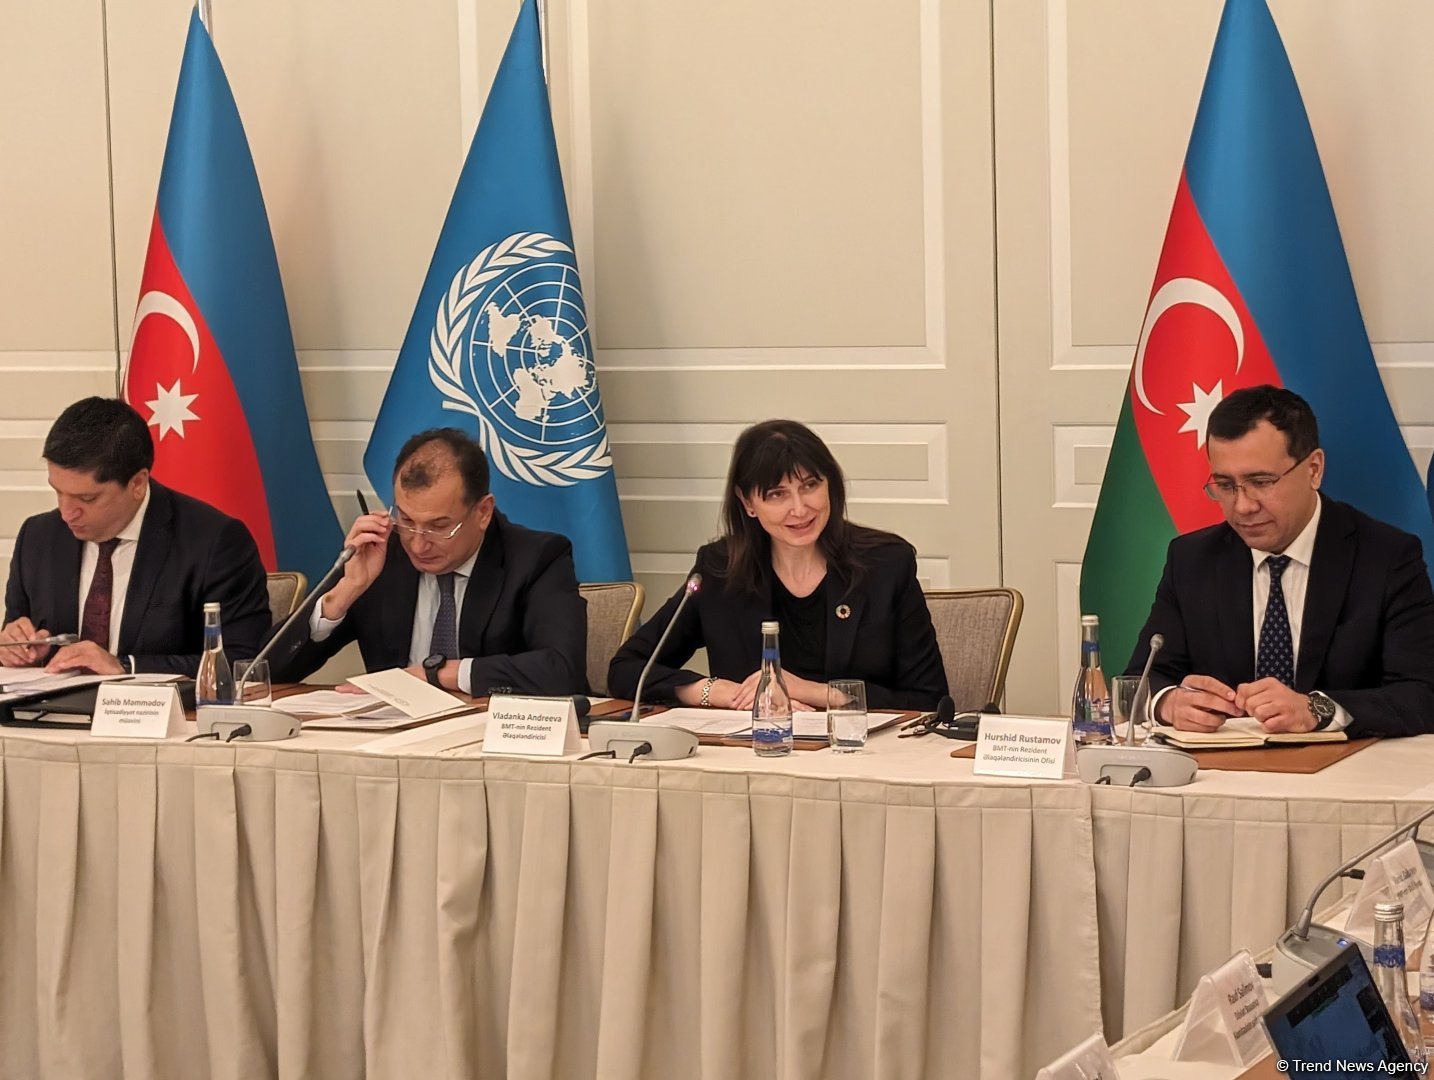 UNFCCC cooperates with Azerbaijan for success at COP29